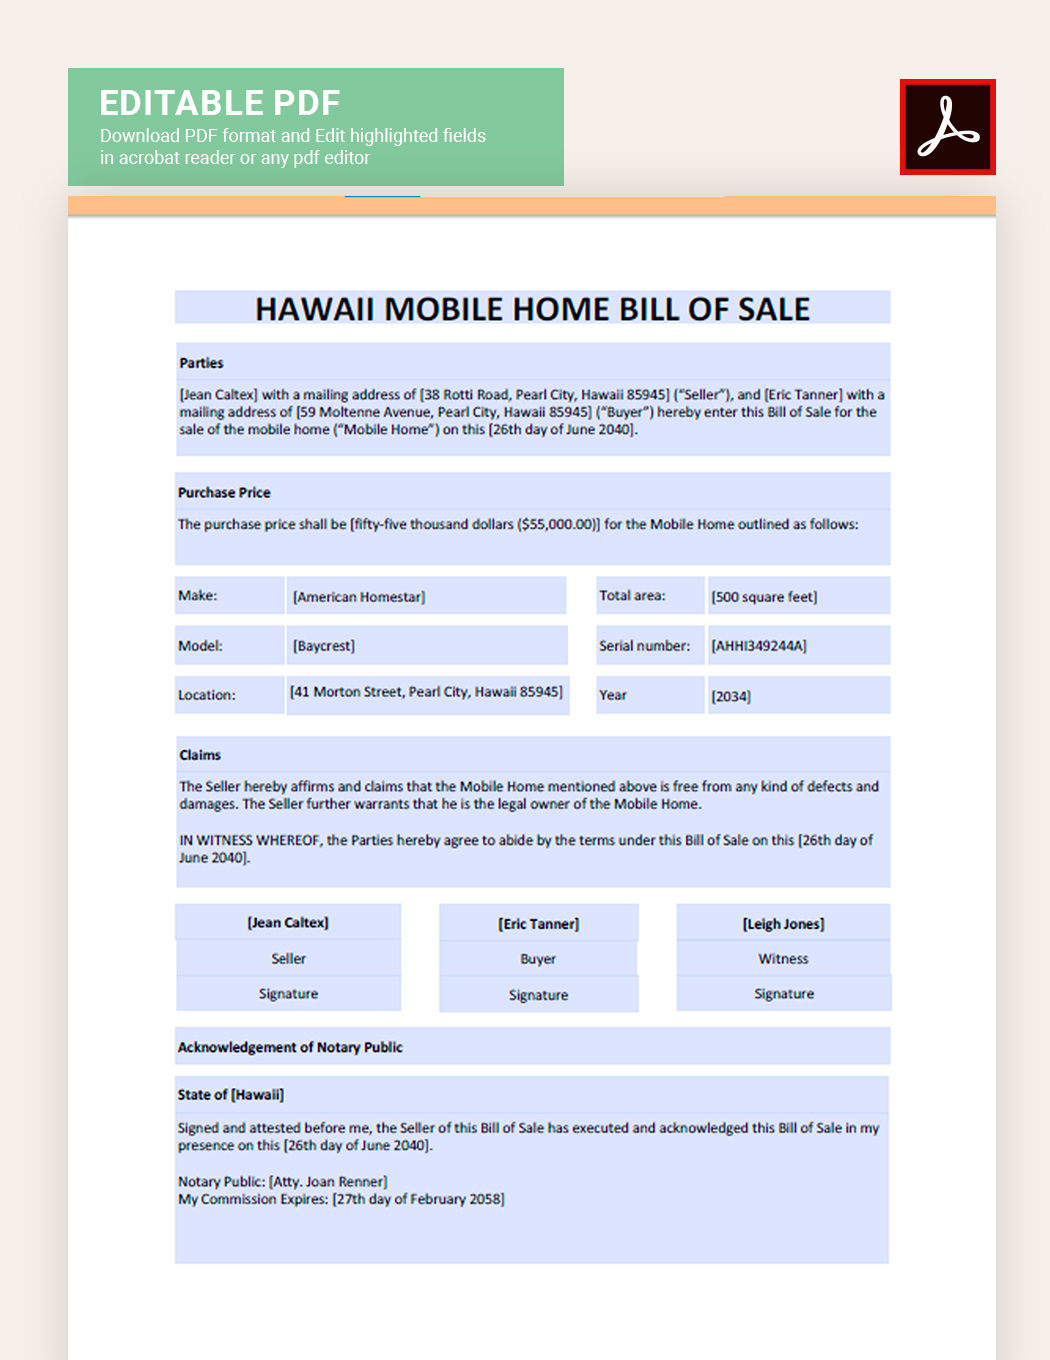 Hawaii Mobile Home Bill Of Sale Form Template in Google Docs Word PDF